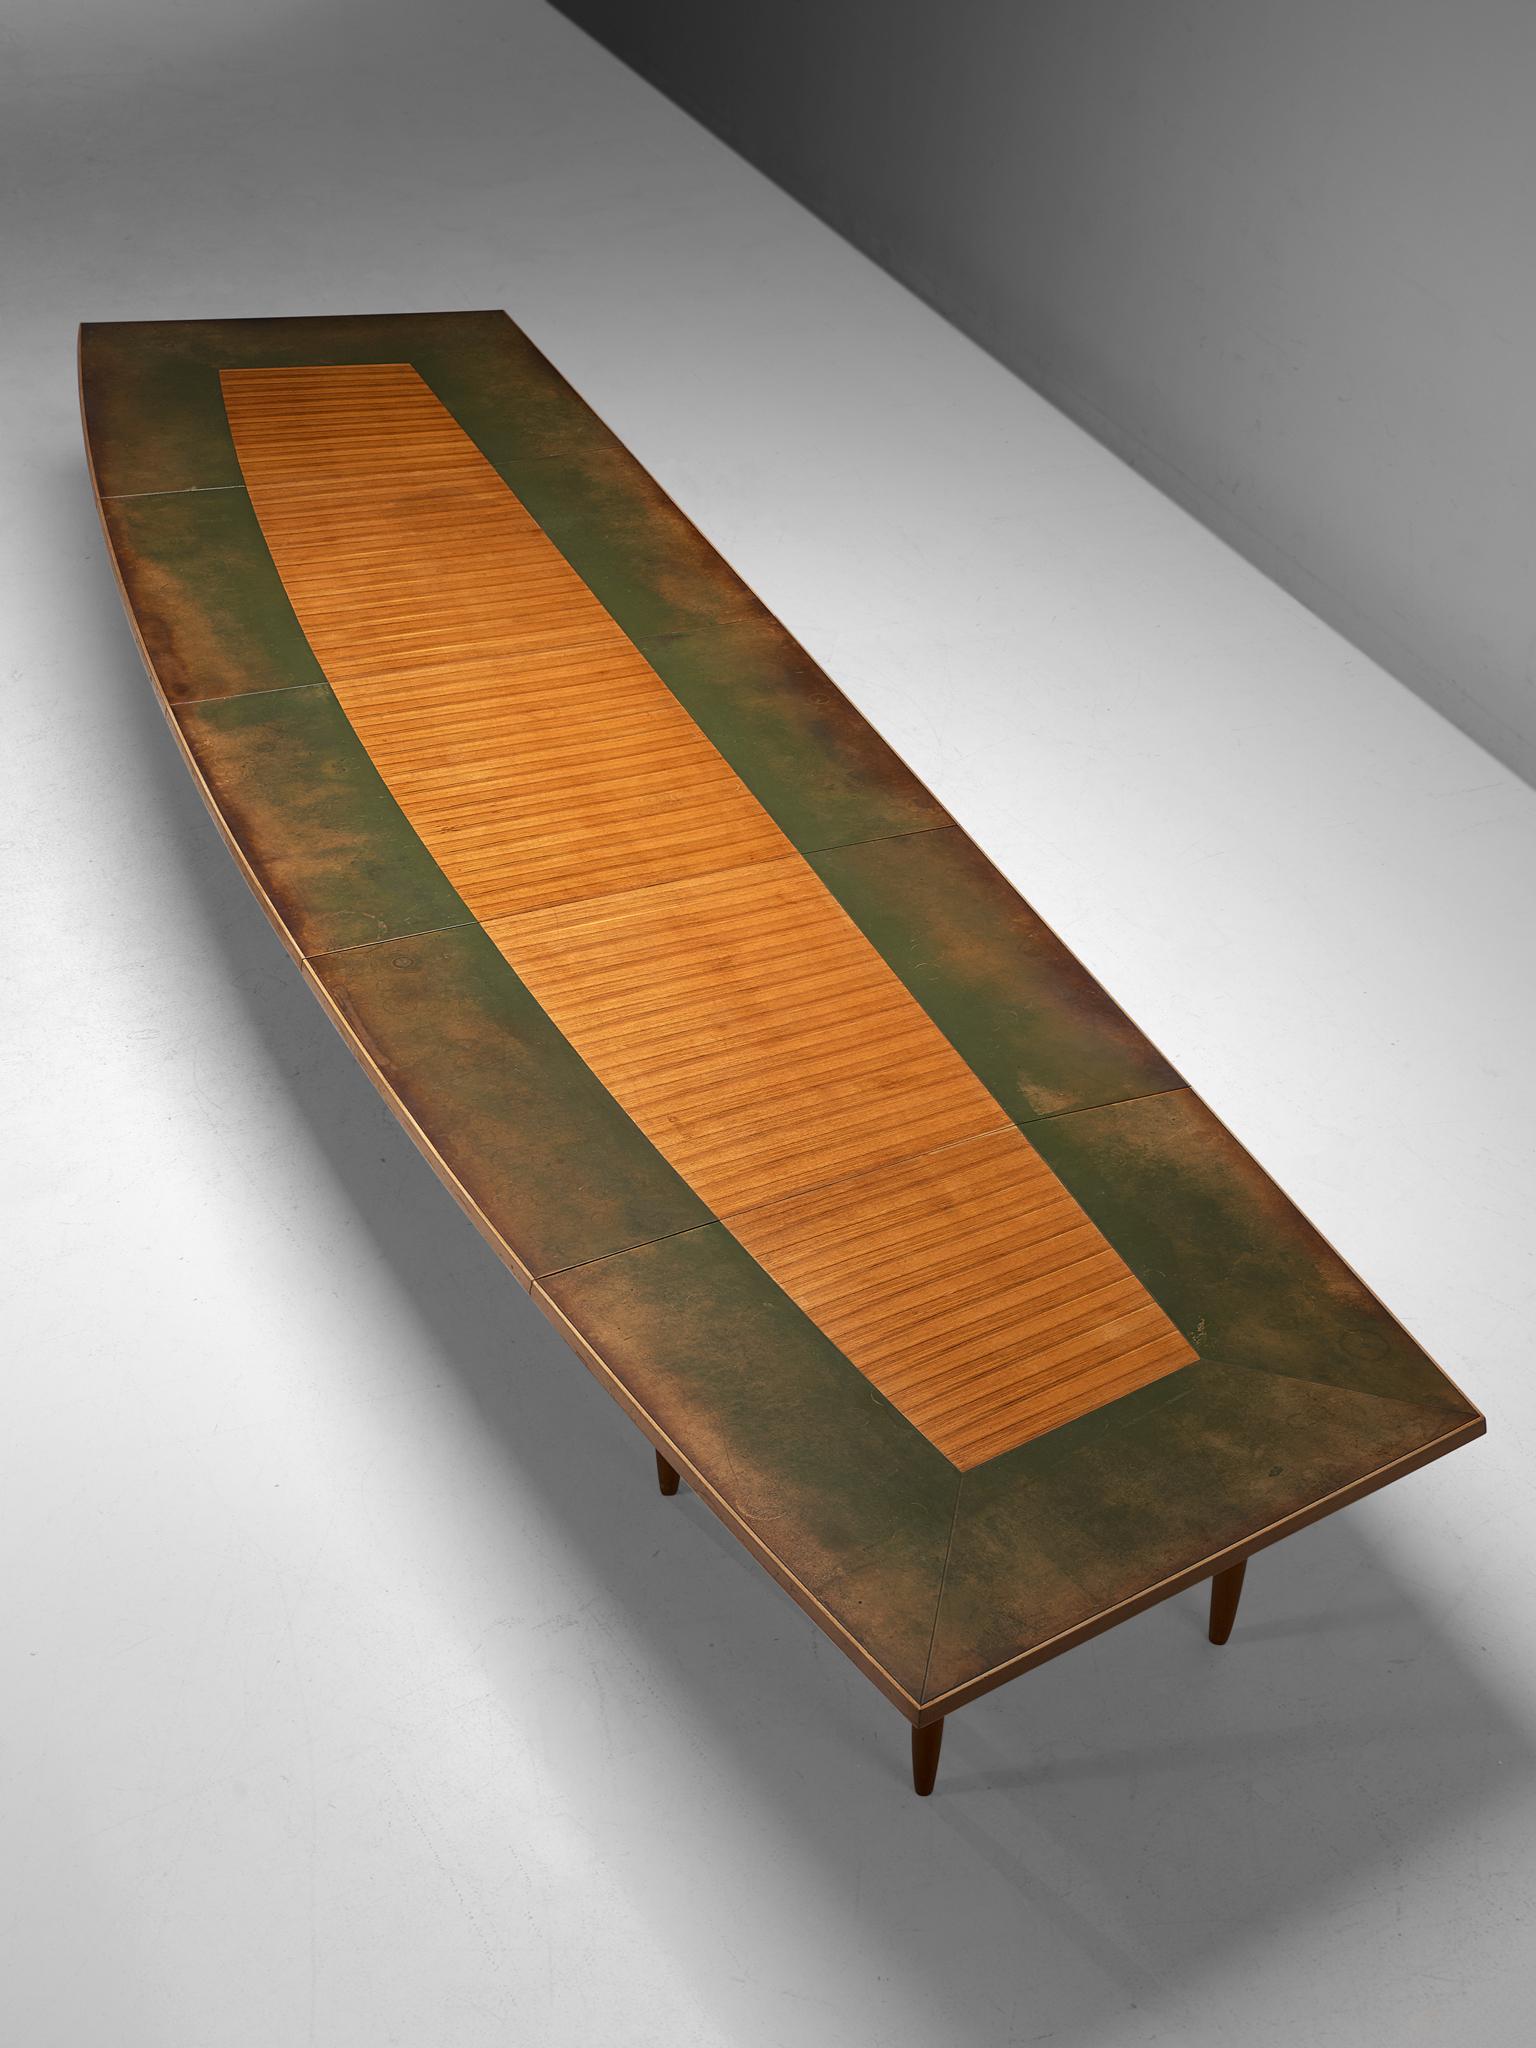 Conference table, walnut, wood and leather, Scandinavia, 1950s.

This nearly 7 metre/23 ft. long conference table is an exquisite piece from the Scandinavian Modern period. Probably custom made, the table features an unusual, yet interesting